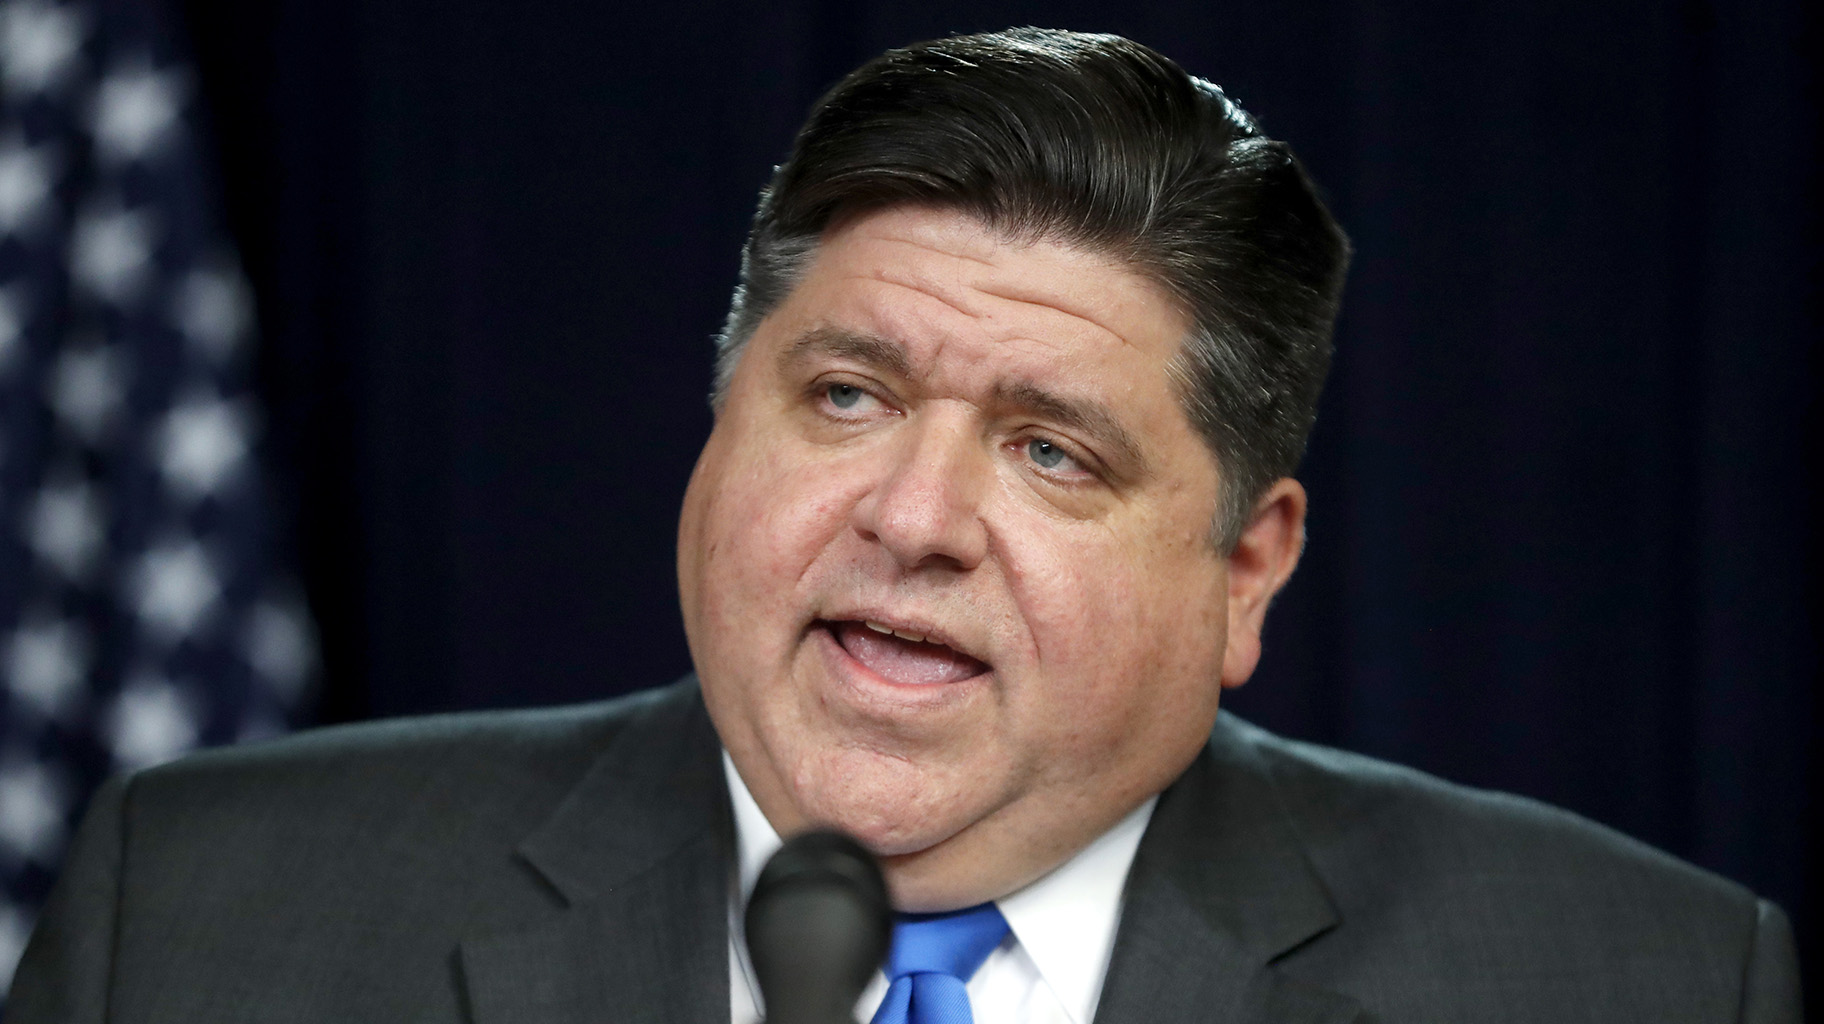 Illinois Gov. J.B. Pritzker announces a shelter-in-place rule to combat the spread of the Covid-19 virus, during a news conference Friday, March 20, 2020, in Chicago. (AP Photo / Charles Rex Arbogast)